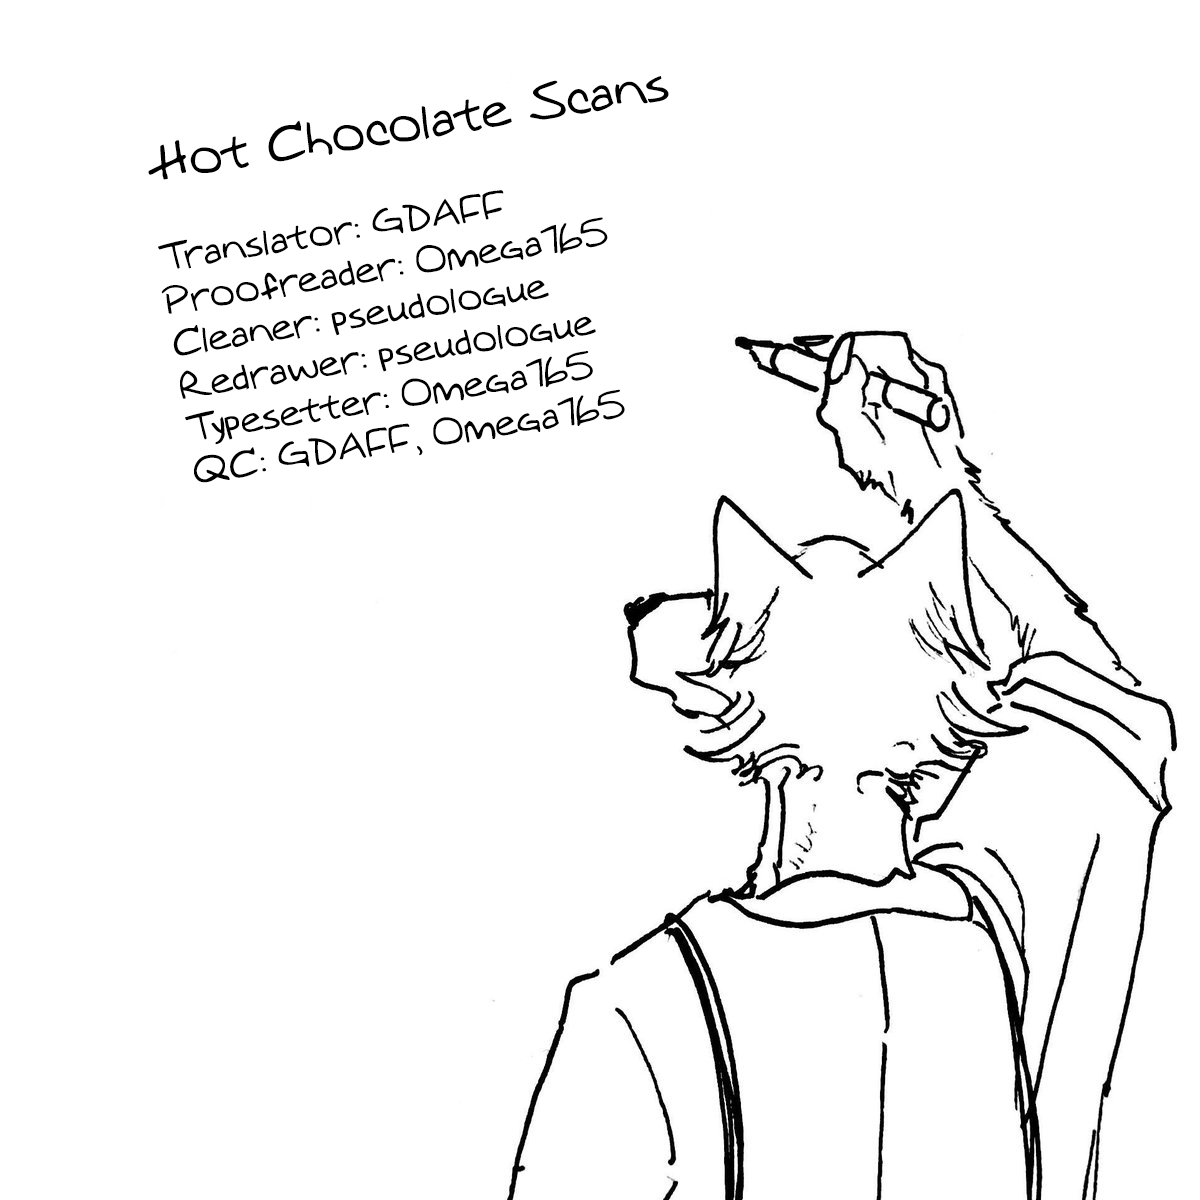 Beastars Ch. 106 Scales that Reflect the Light of the Moon